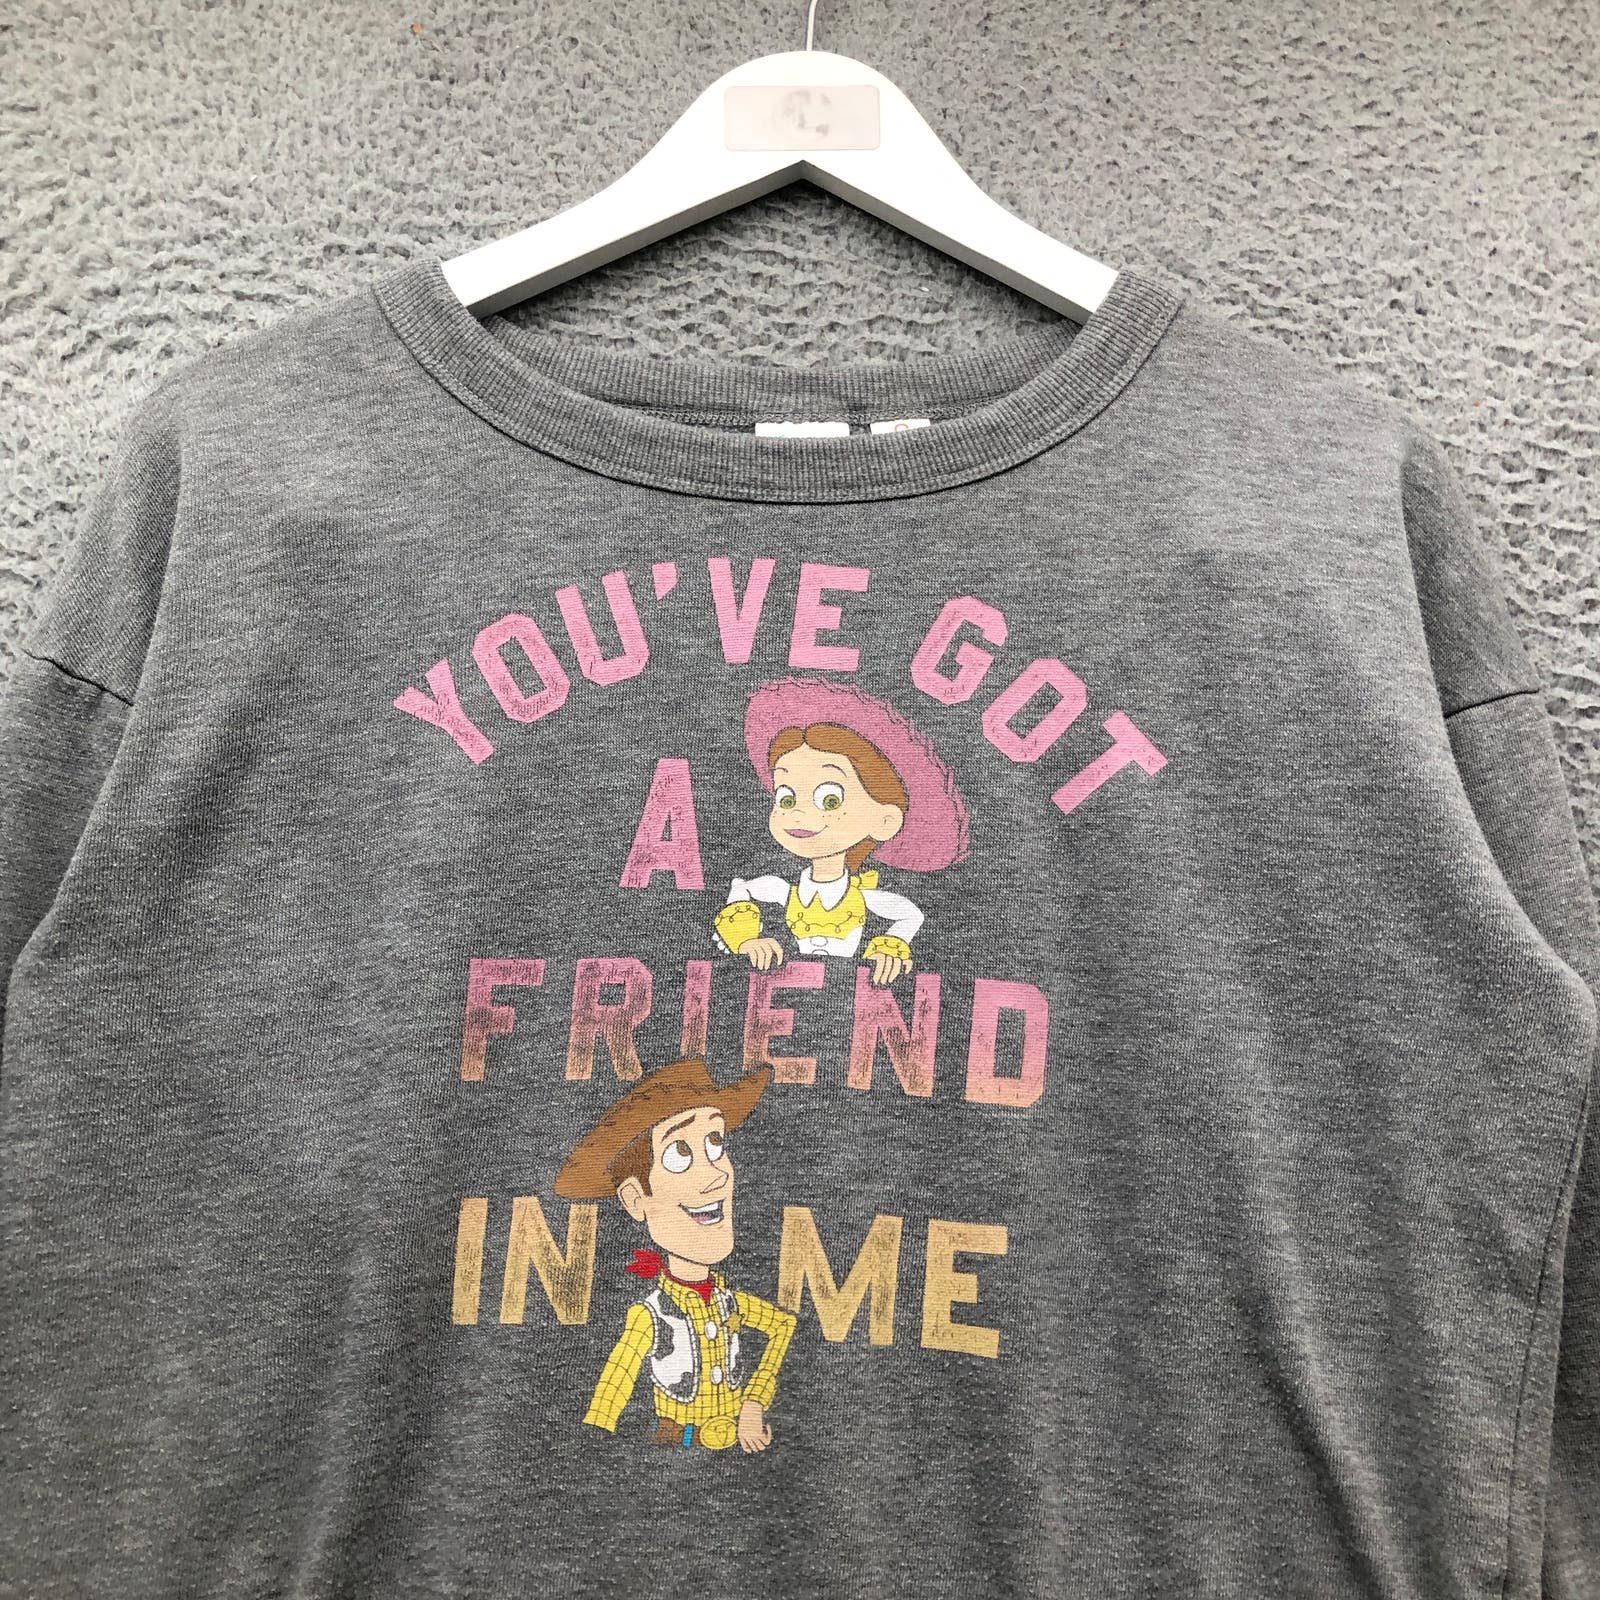 Classic Disney Pixar Toy Story Sweatshirt Womens S Long Sleeve You´ve Got A Friend In Me HqE1Ymi2Y Counter Genuine 